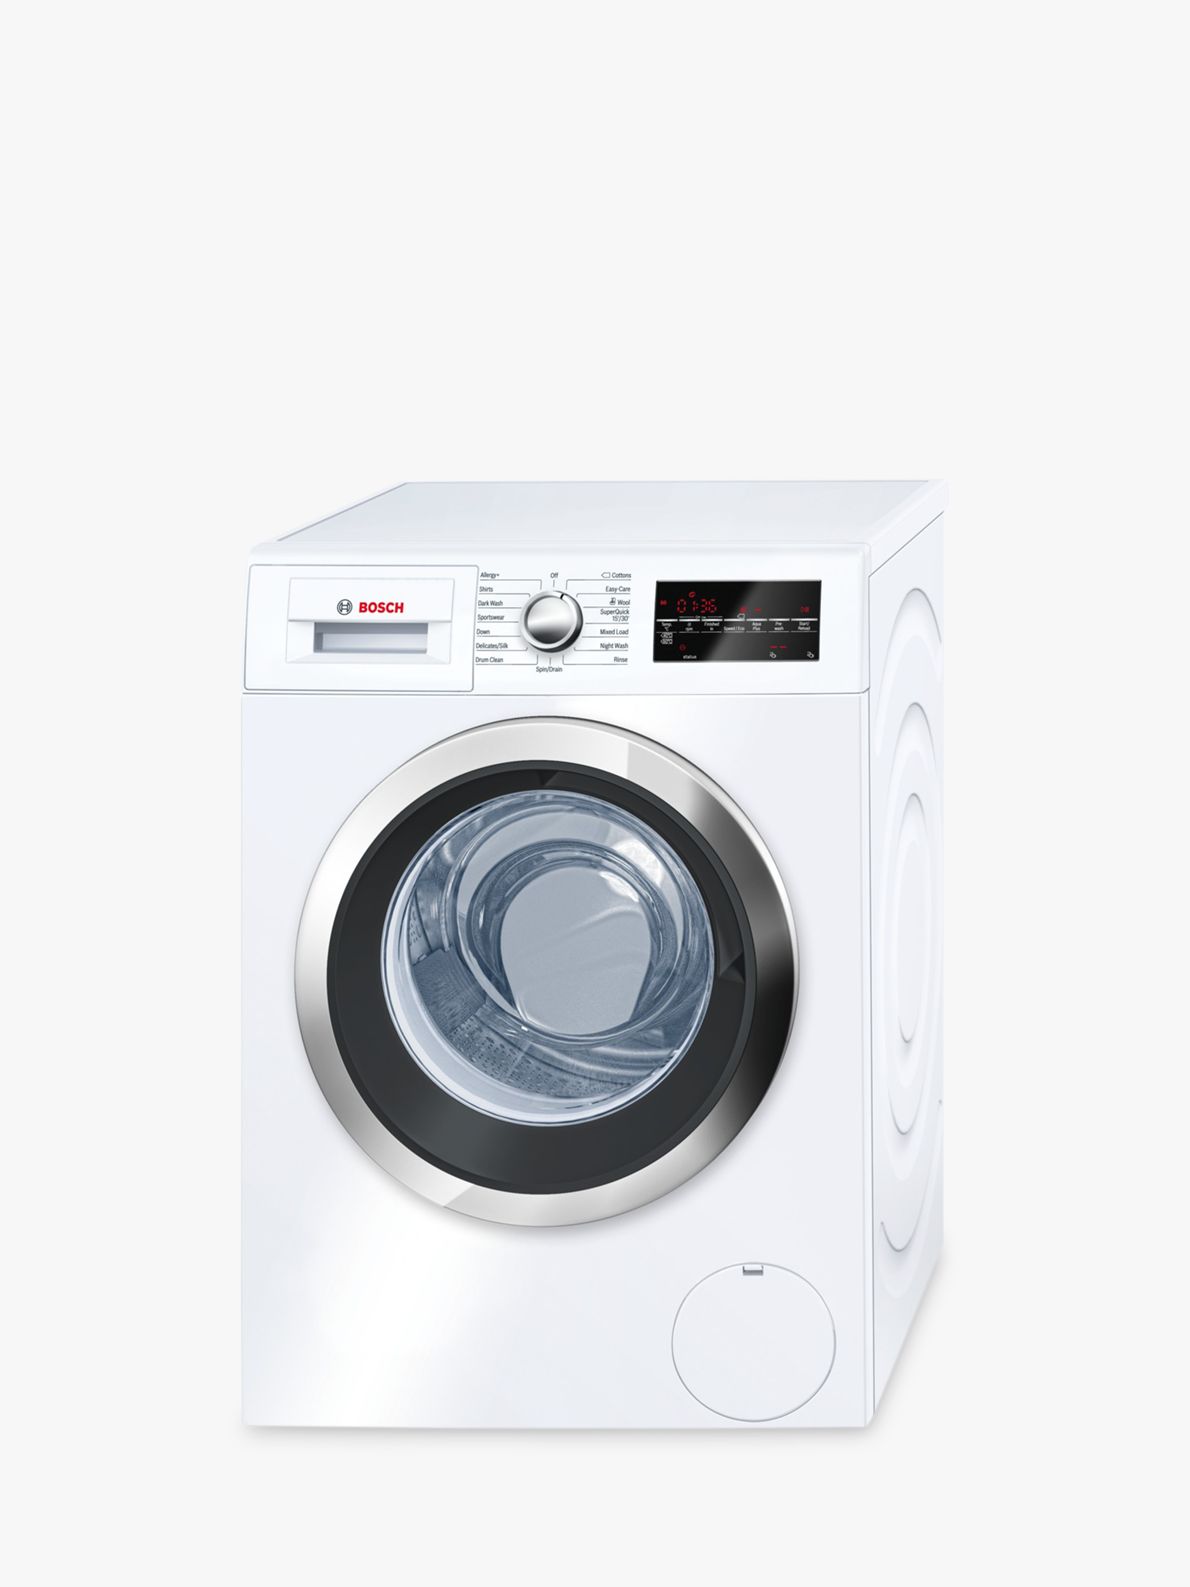 Bosch WAT32480GB Freestanding Washing Machine, 9kg Load, A+++ Energy Rating, 1600rpm Spin, White